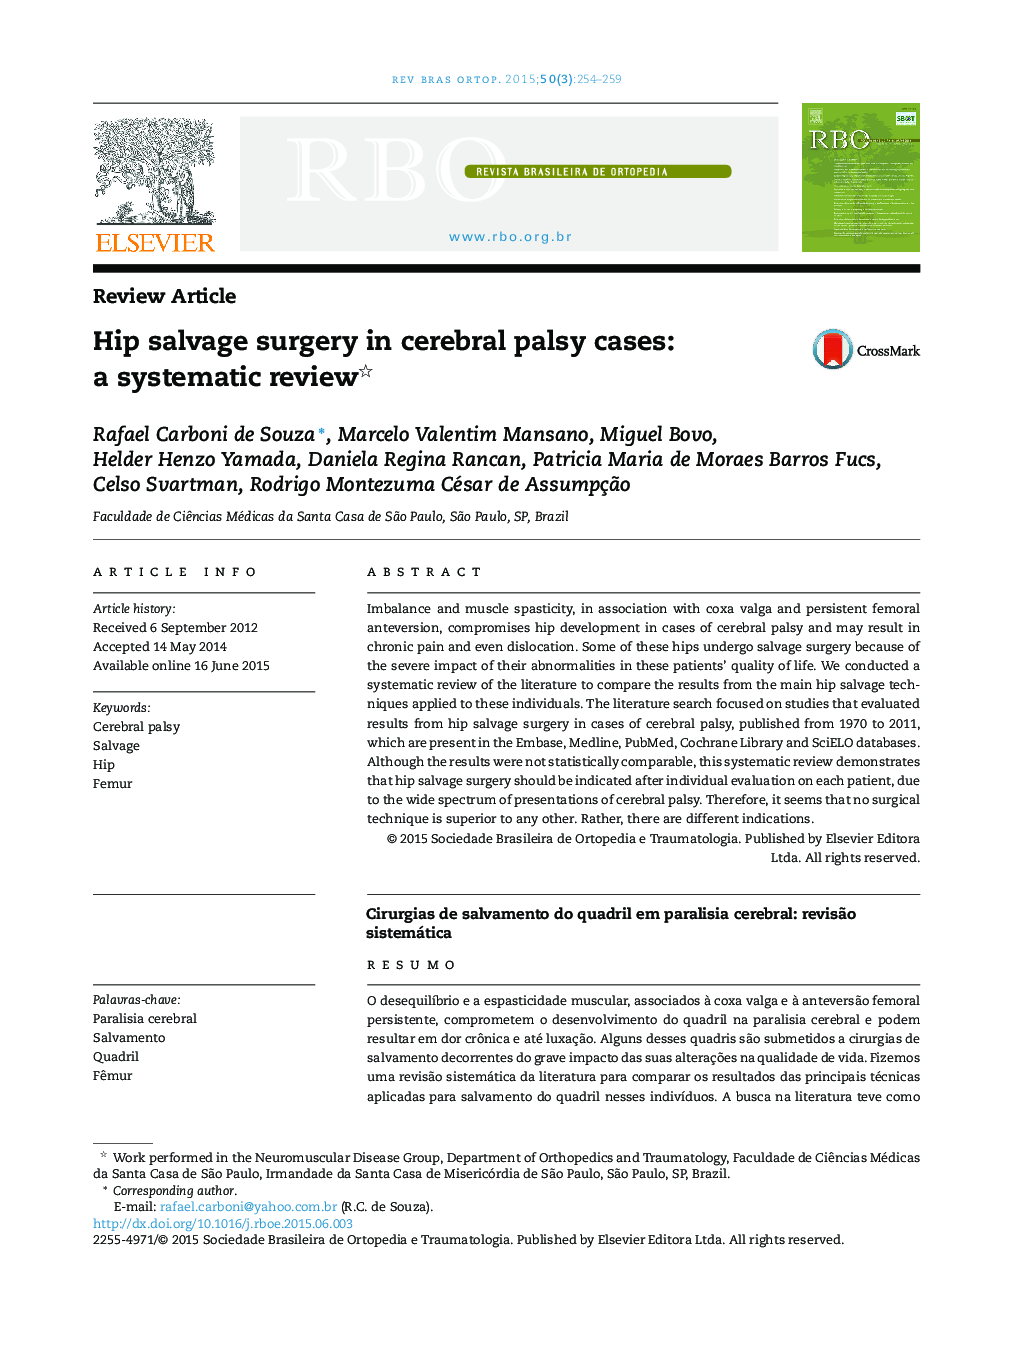 Hip salvage surgery in cerebral palsy cases: a systematic review 